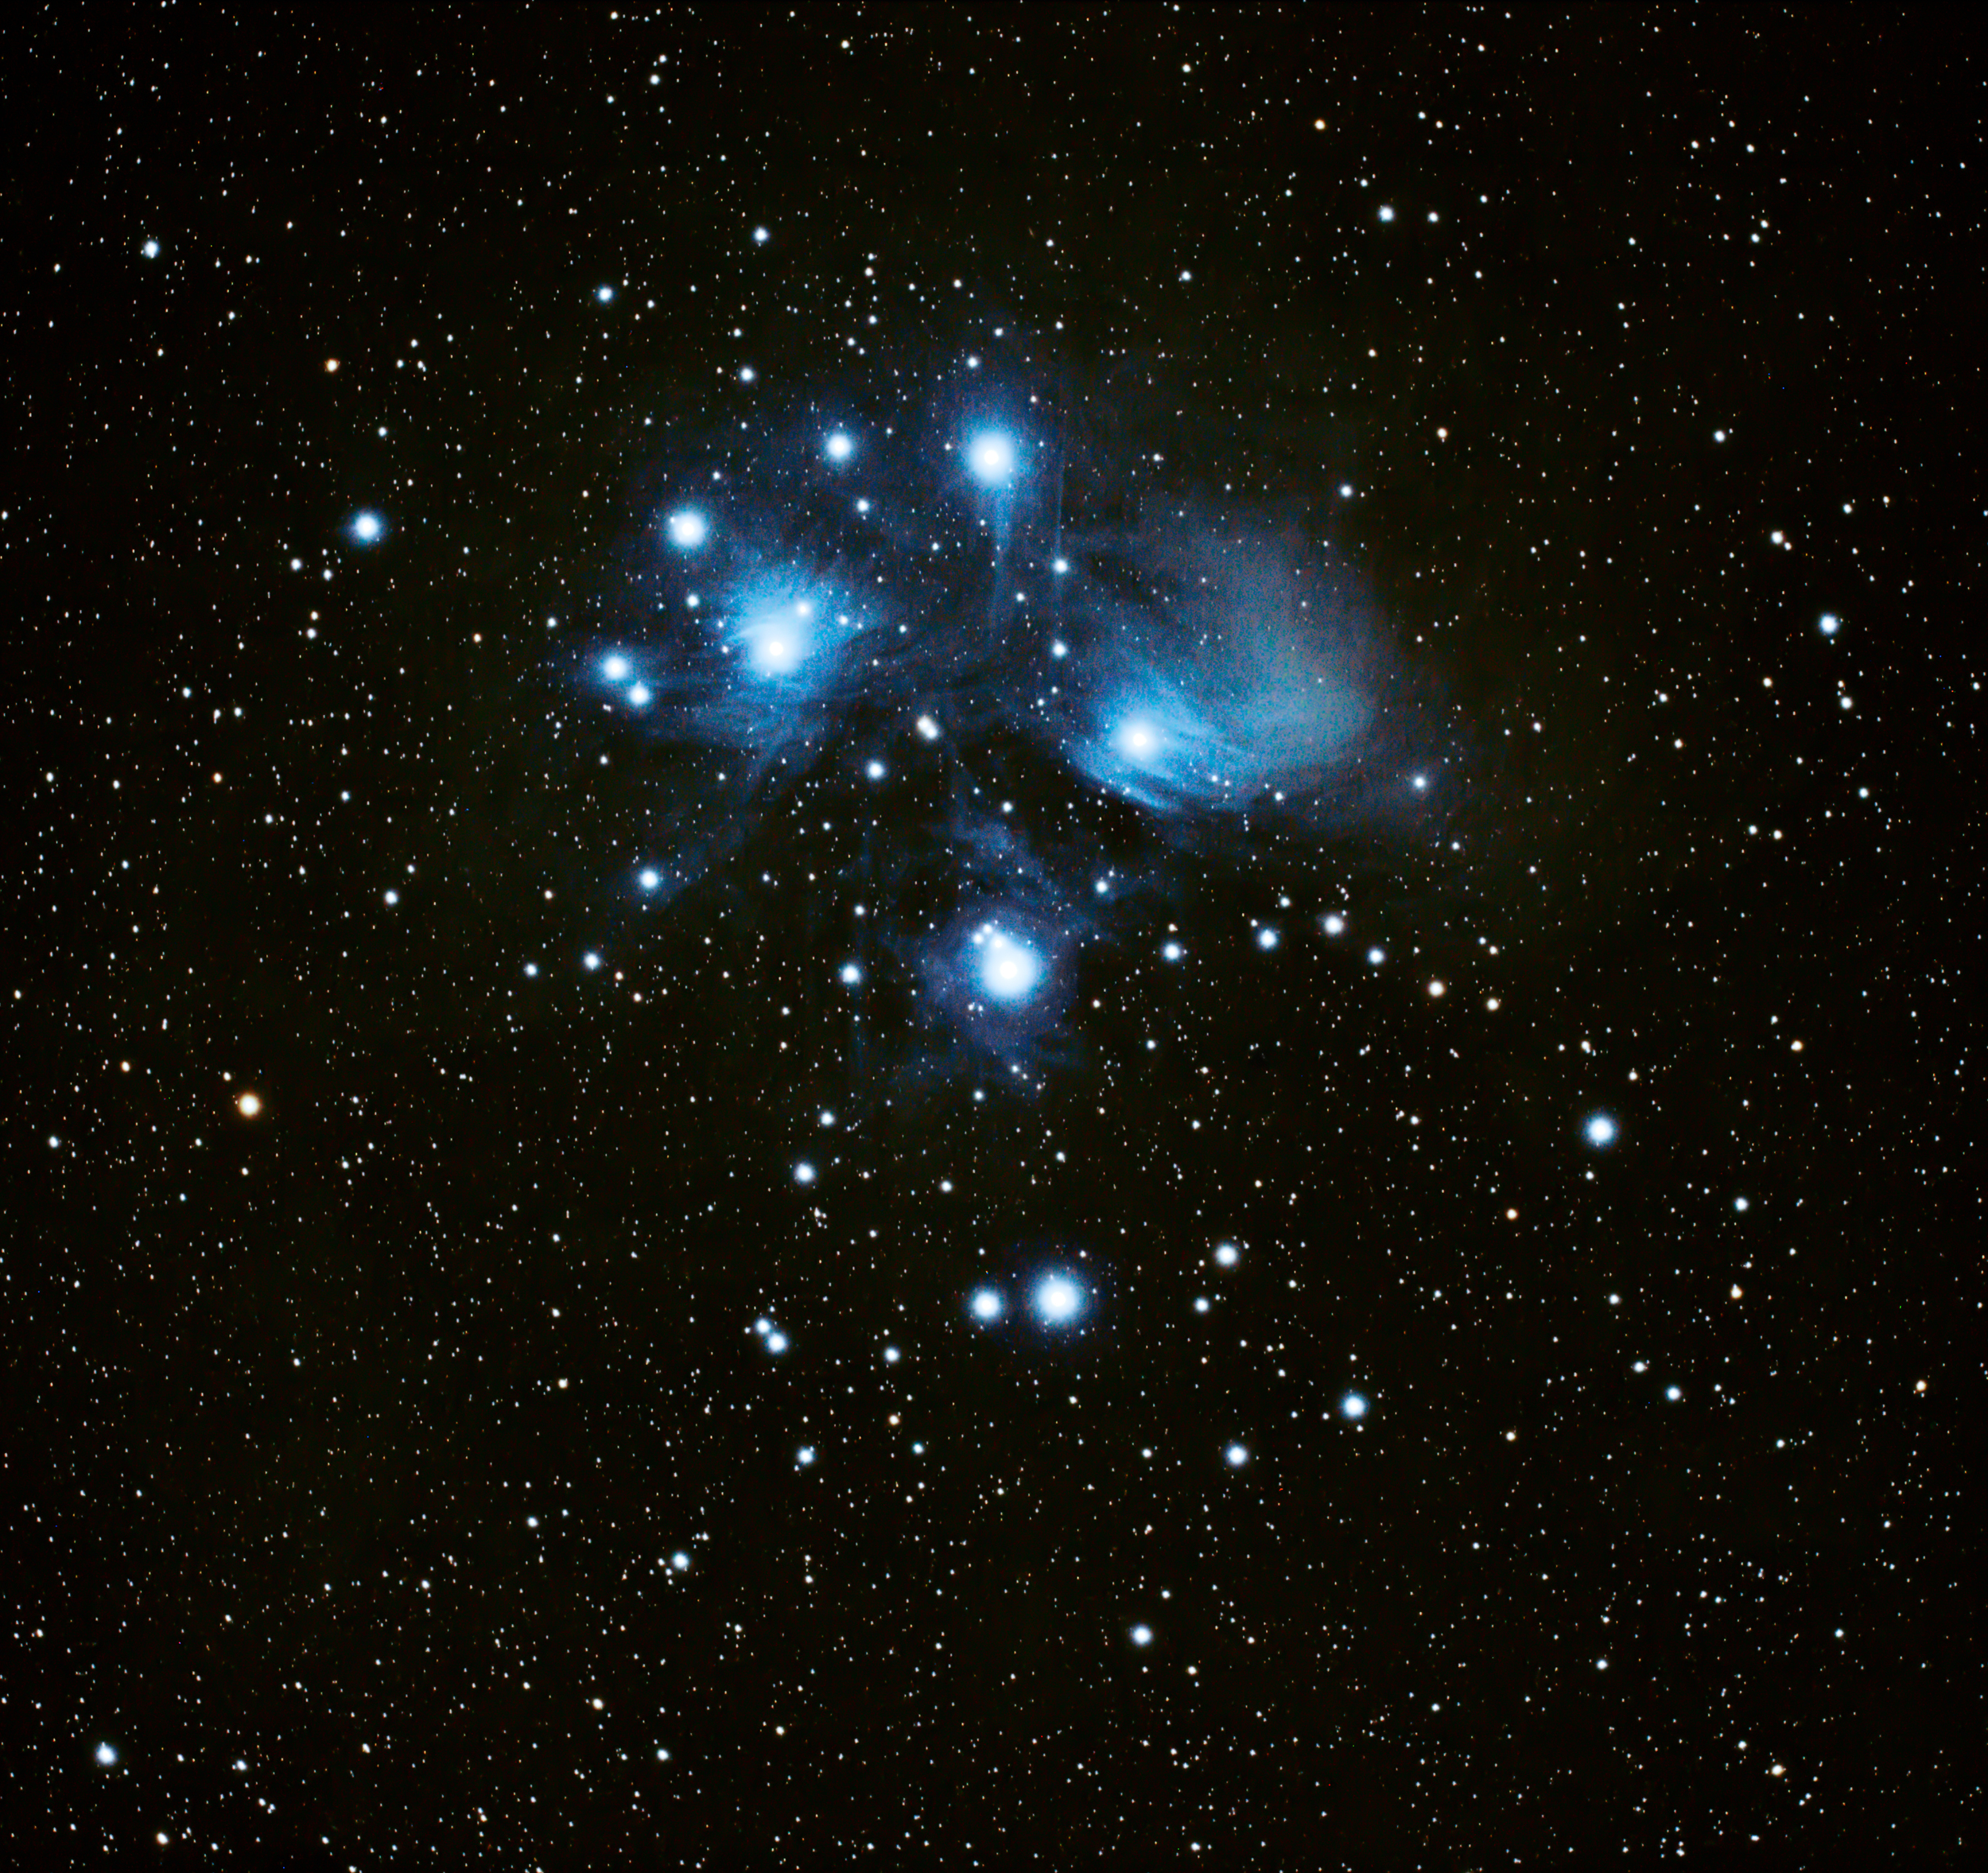 M45 - The Pleiades Star Cluster